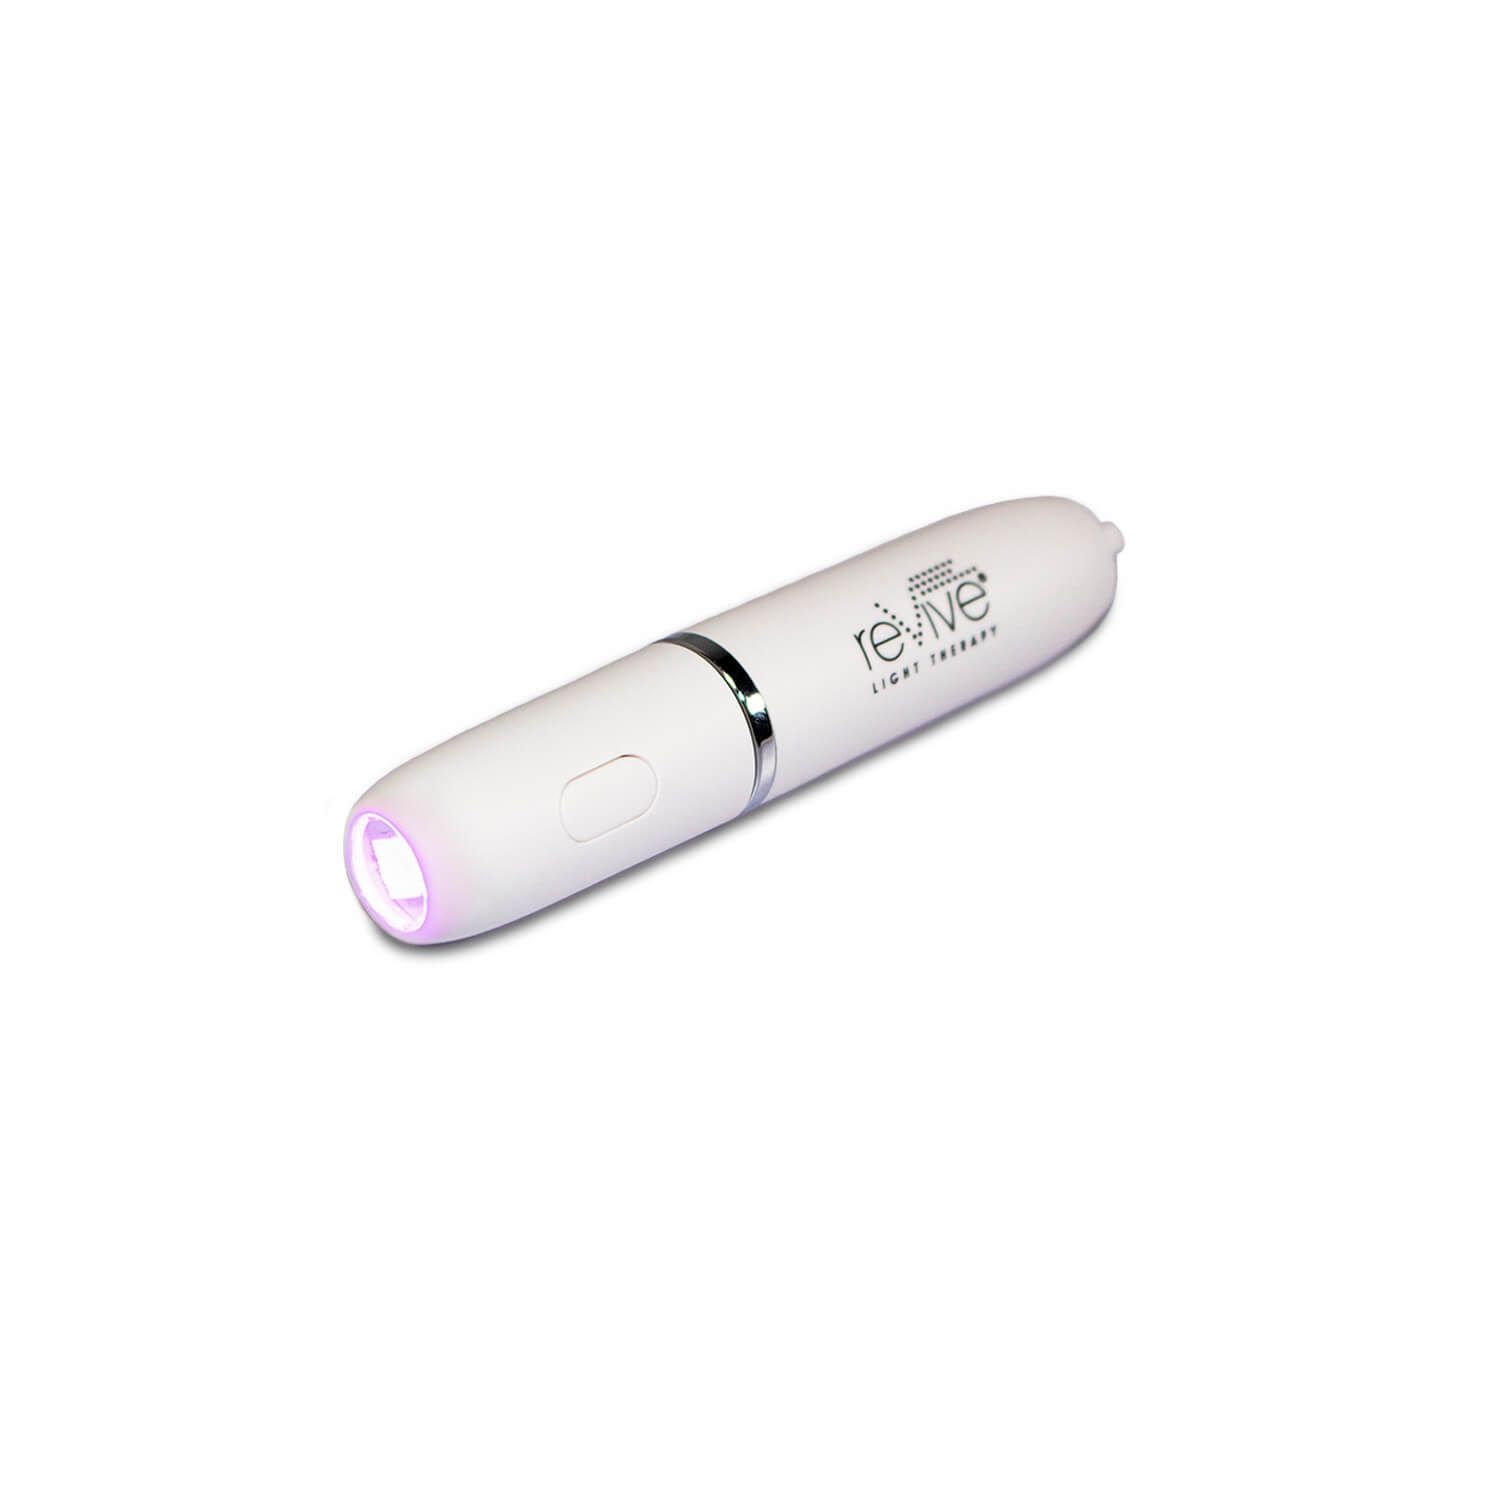 reVive Light Therapy® Poof Portable Acne Treatment - White